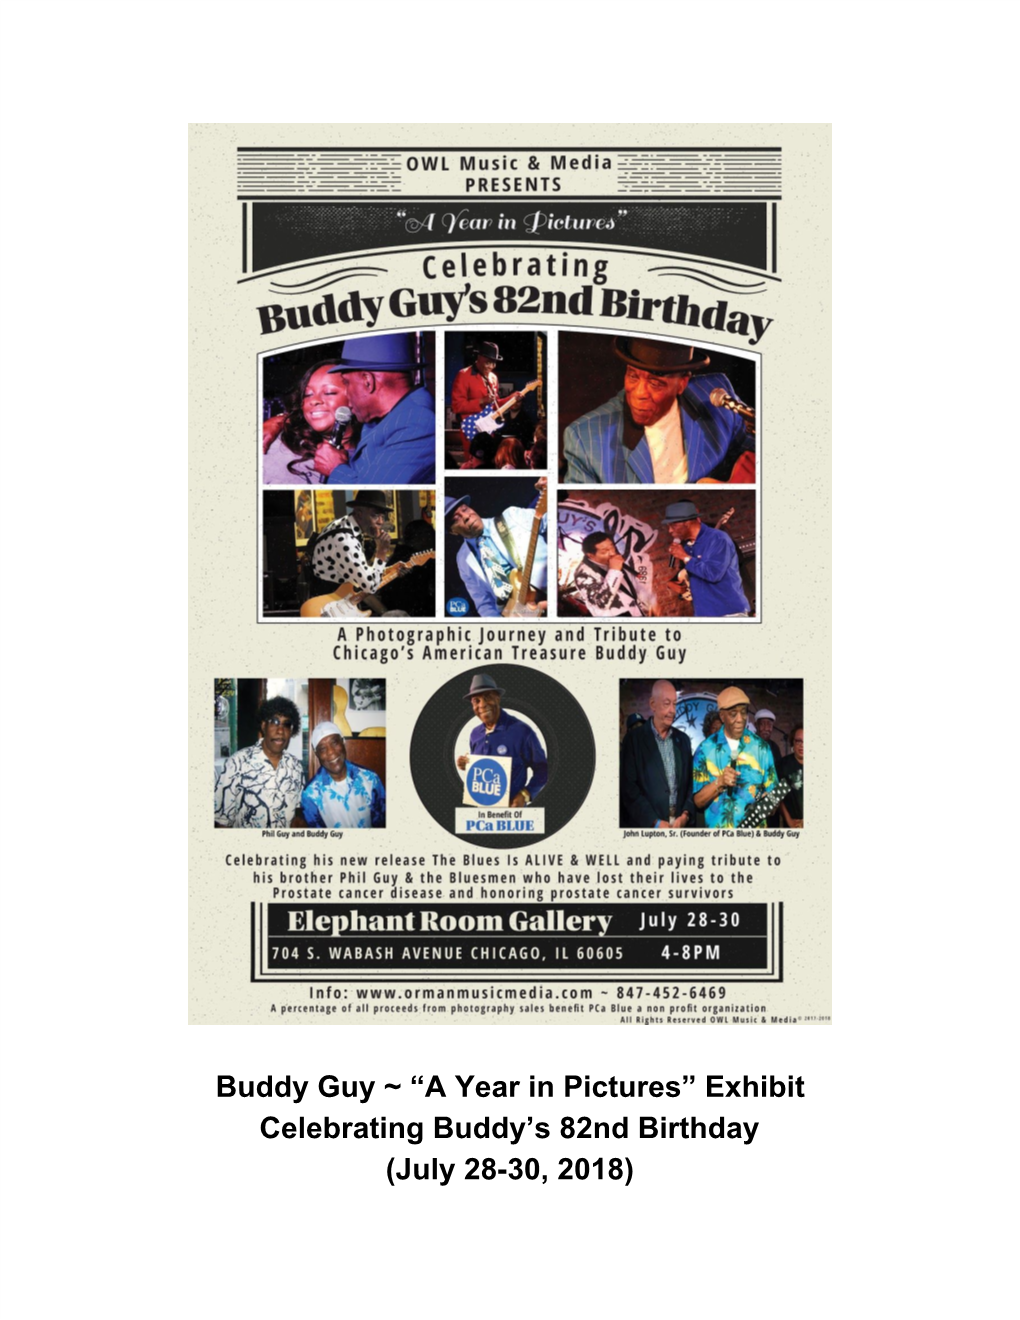 Buddy Guy ~ “A Year in Pictures” Exhibit Celebrating Buddy's 82Nd